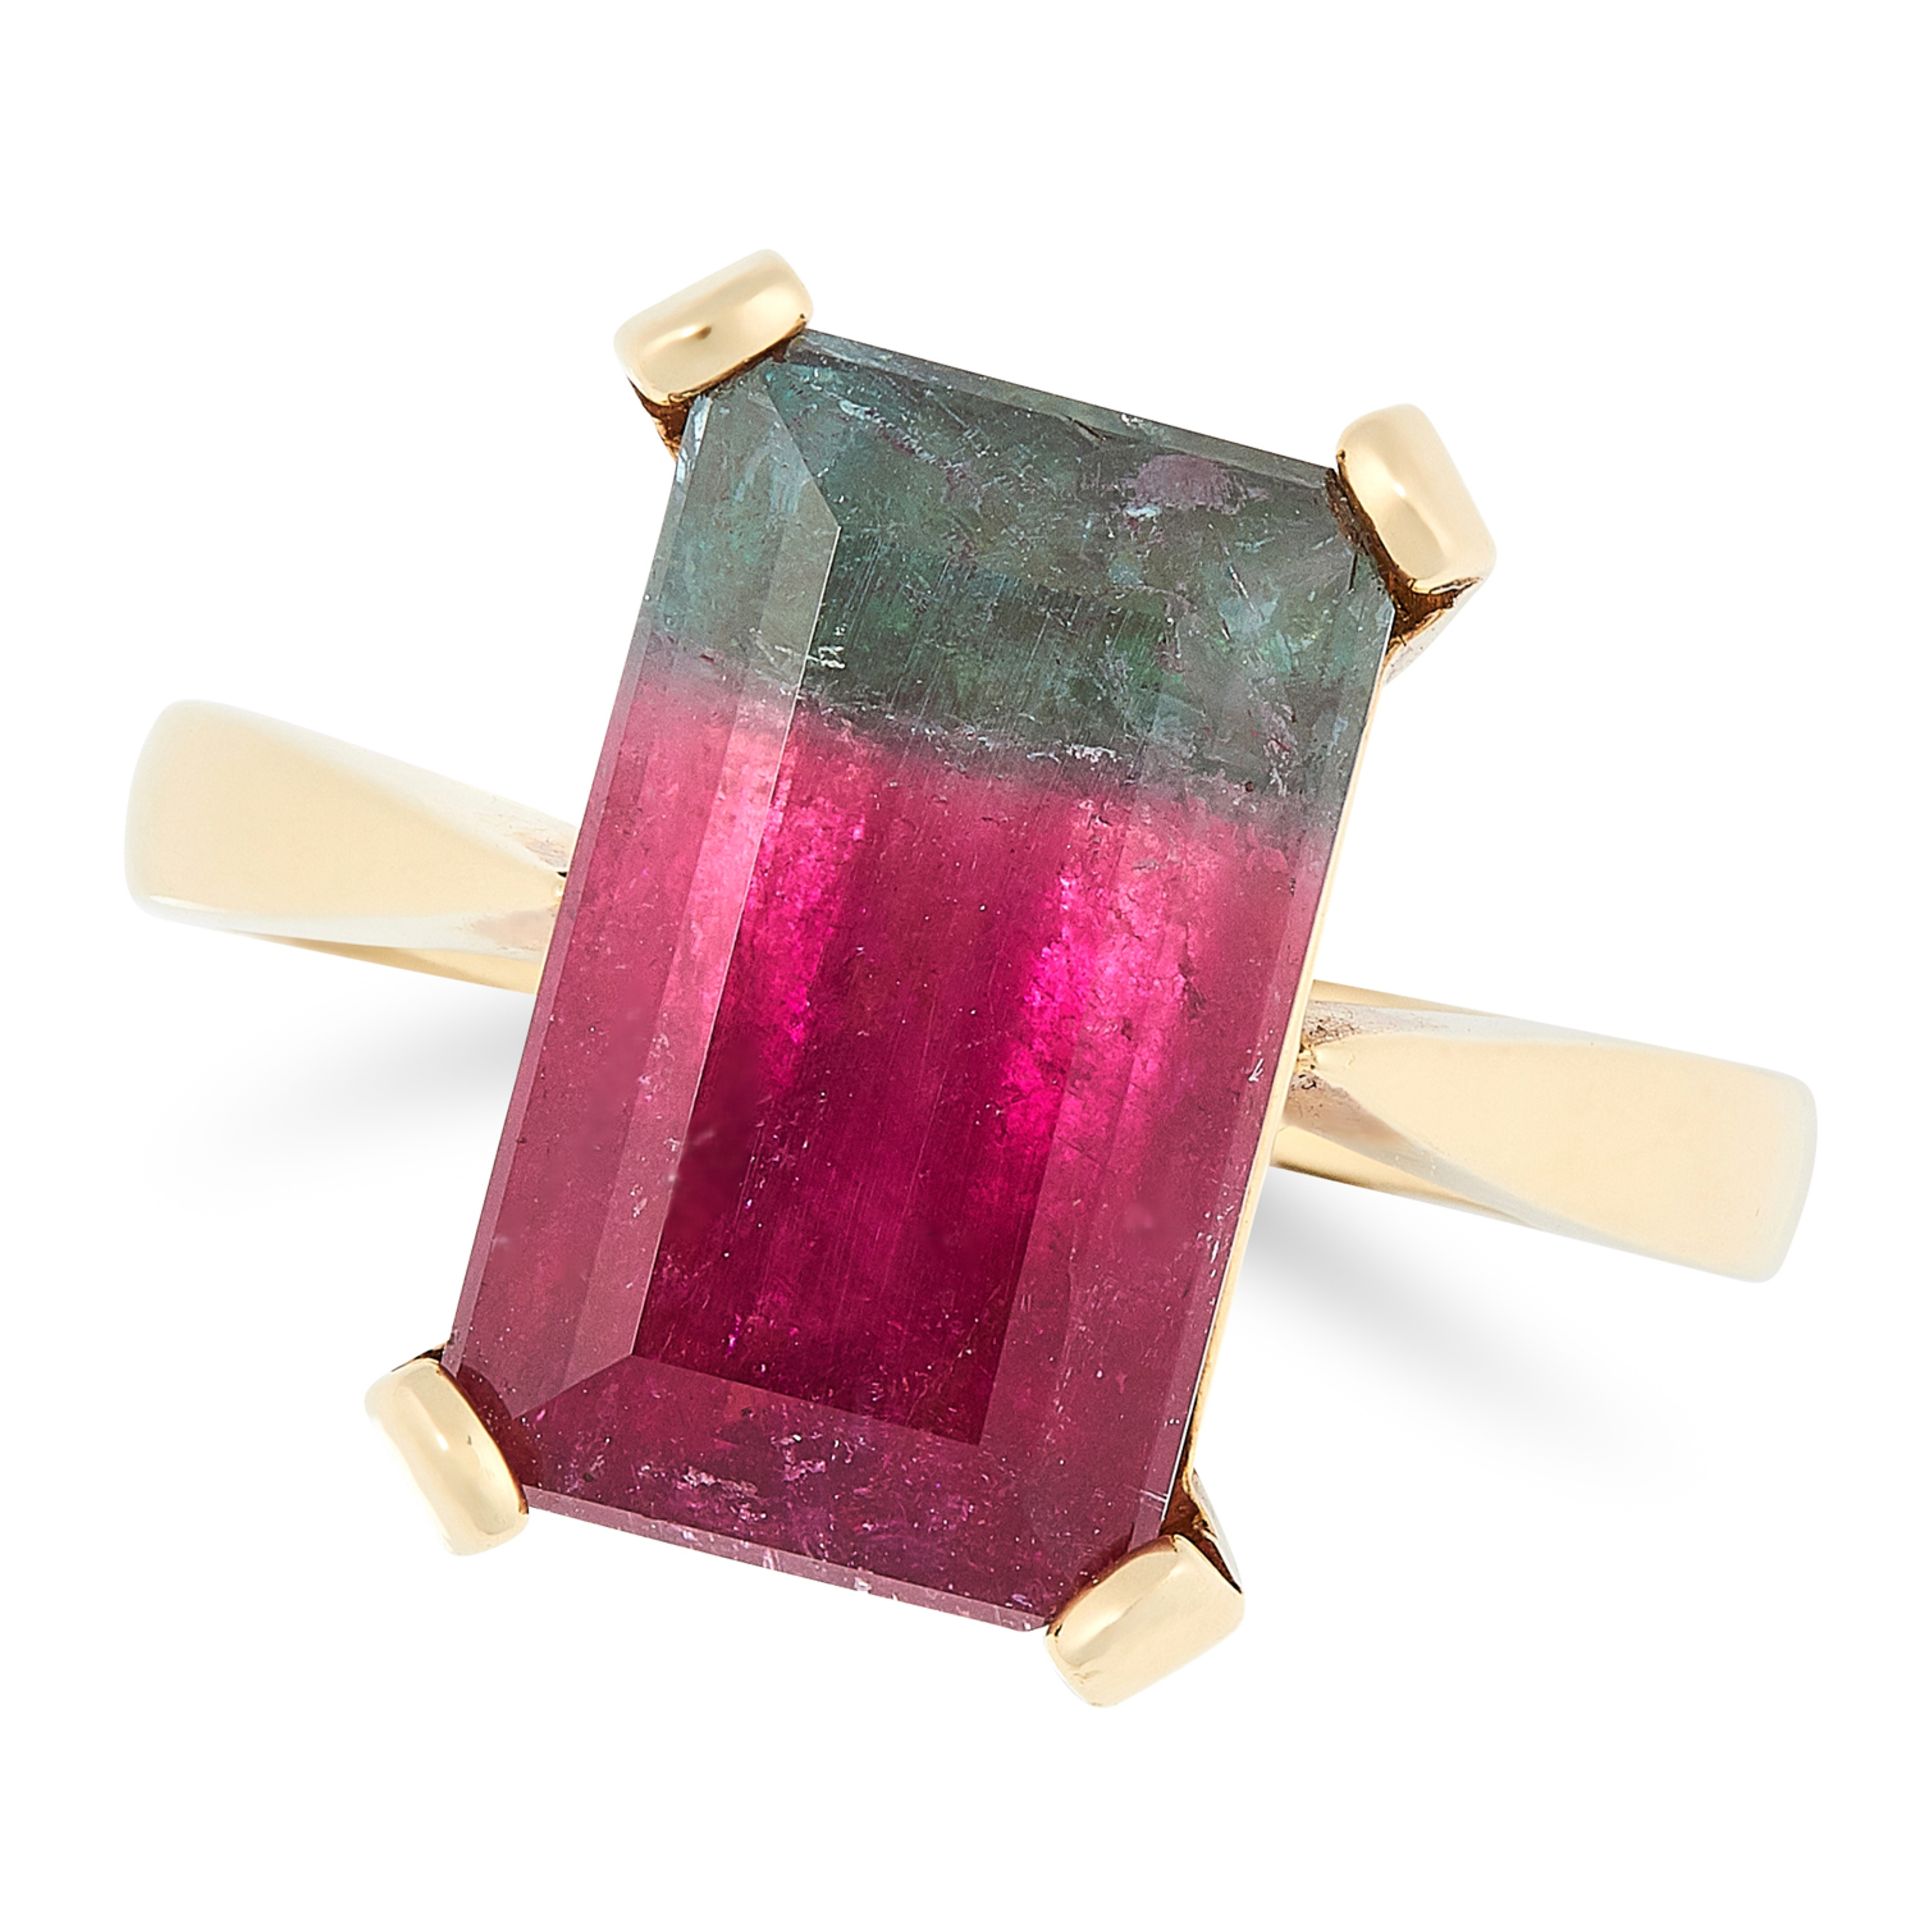 A WATERMELON TOURMALINE DRESS RING in 18ct yellow gold, set with an emerald cut watermelon